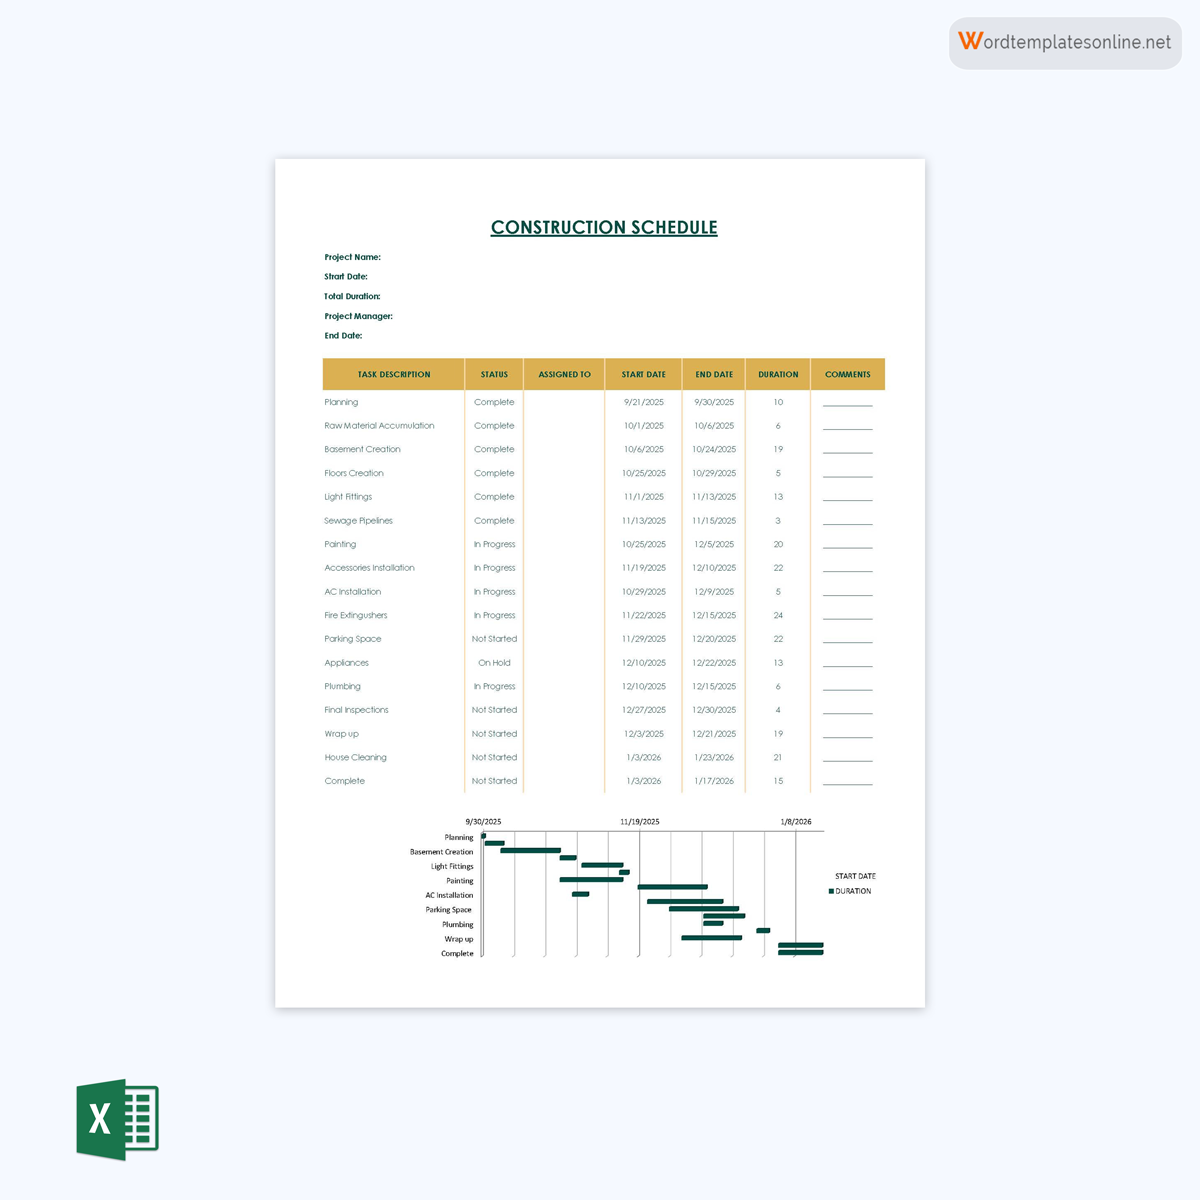 Construction Schedule Template - Excel - Free Download